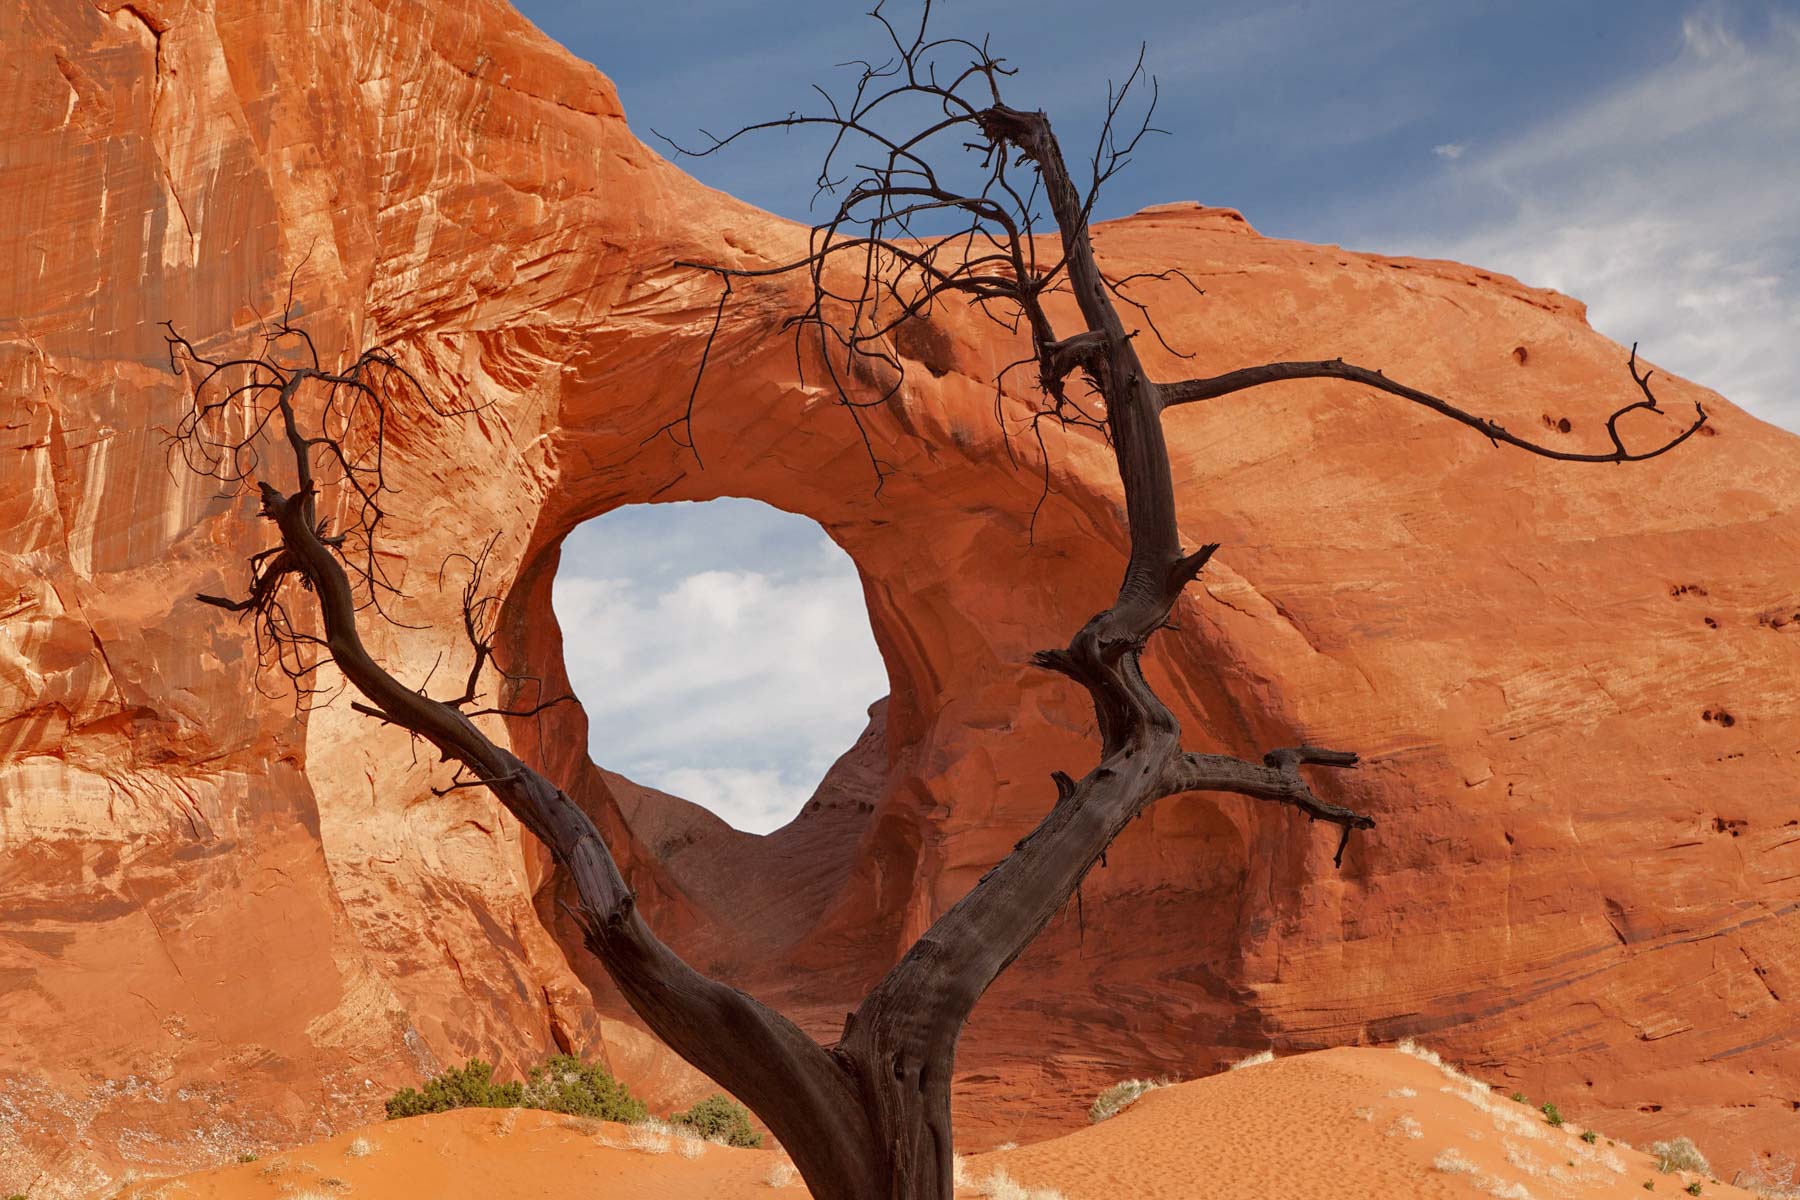 Ear of the Wind arch in Monument Valley